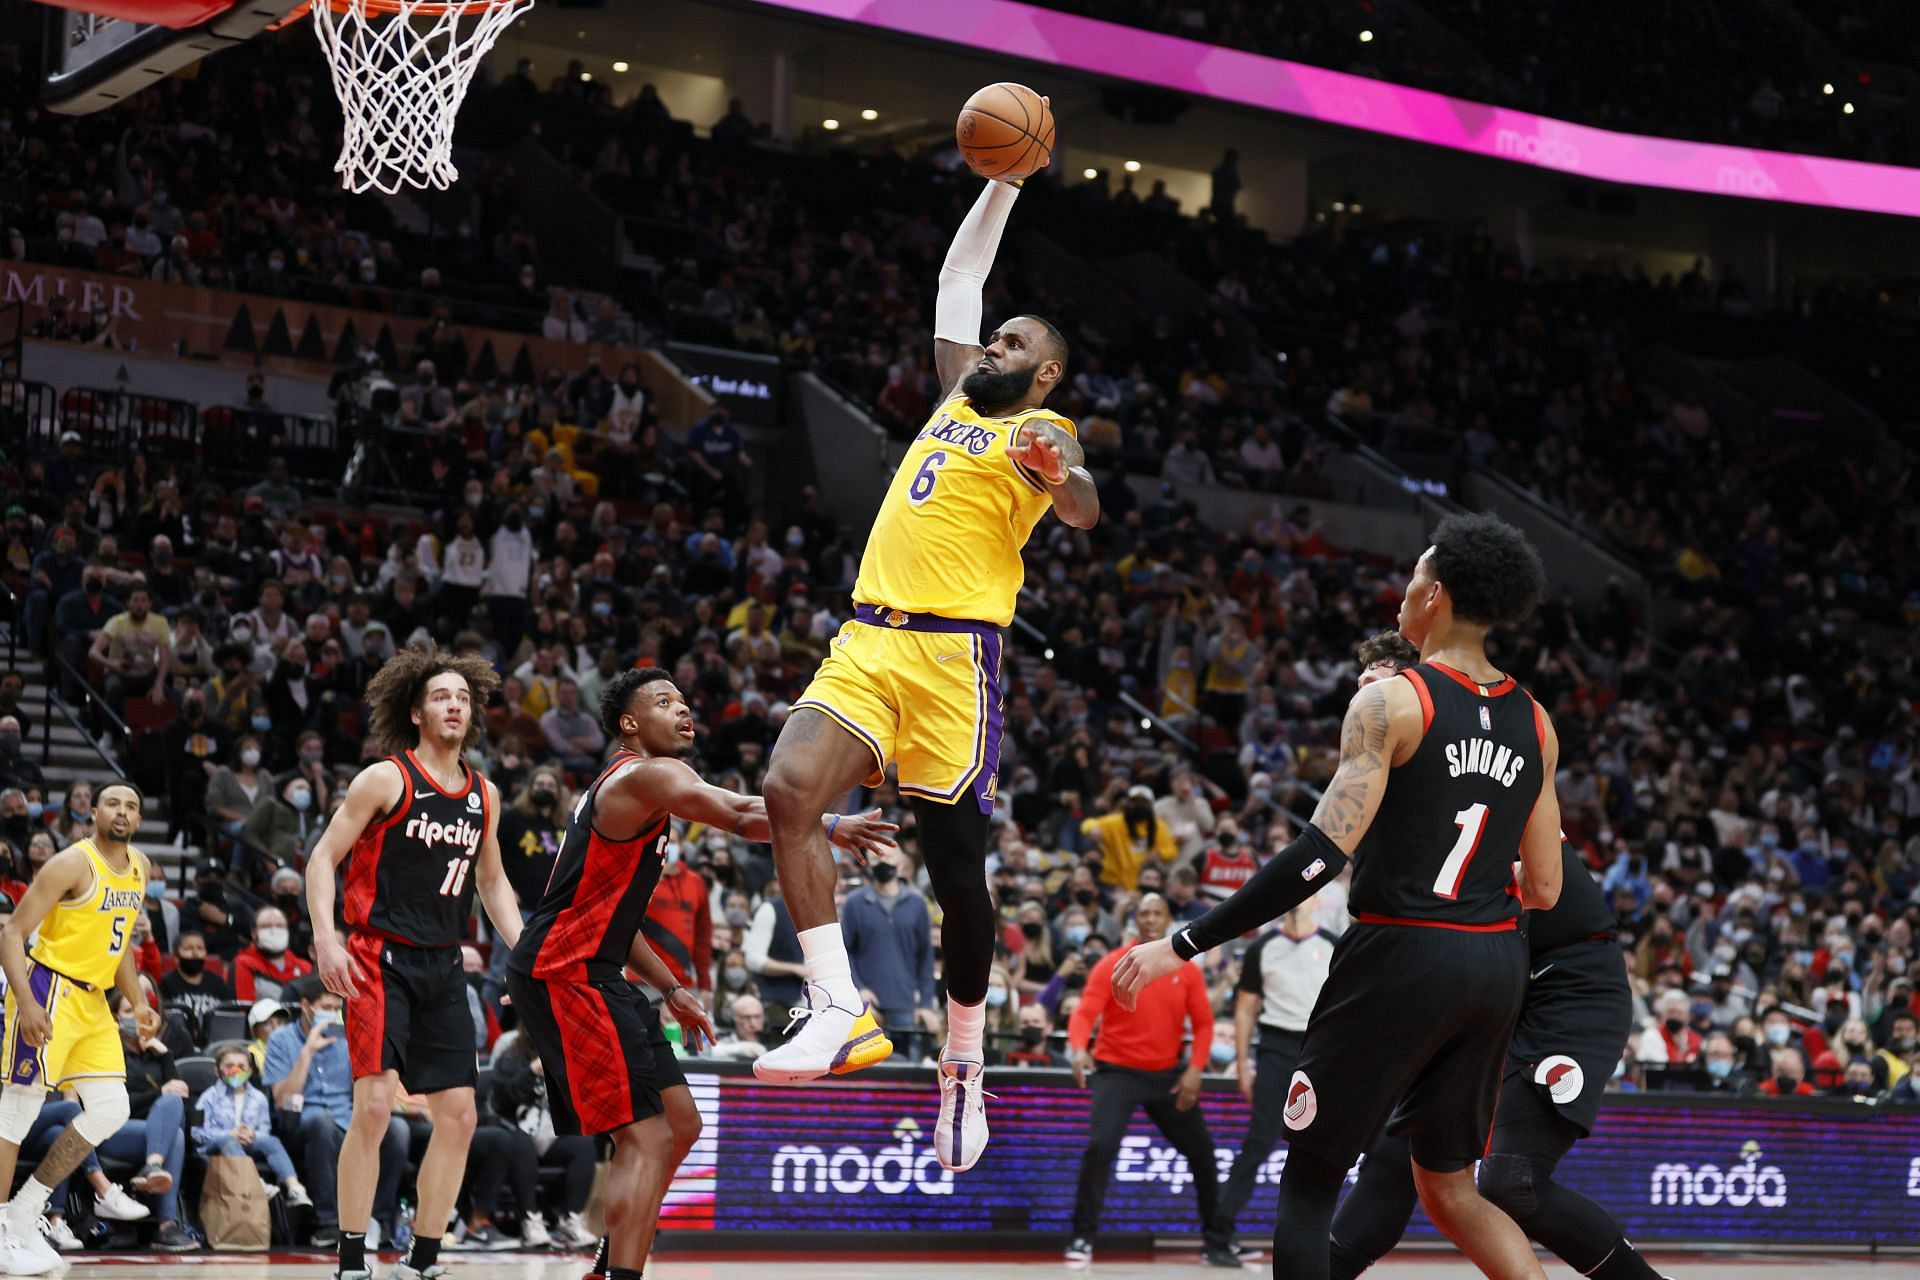 LeBron James # 6 of the Los Angeles Lakers dunks against the Portland Trail Blazers